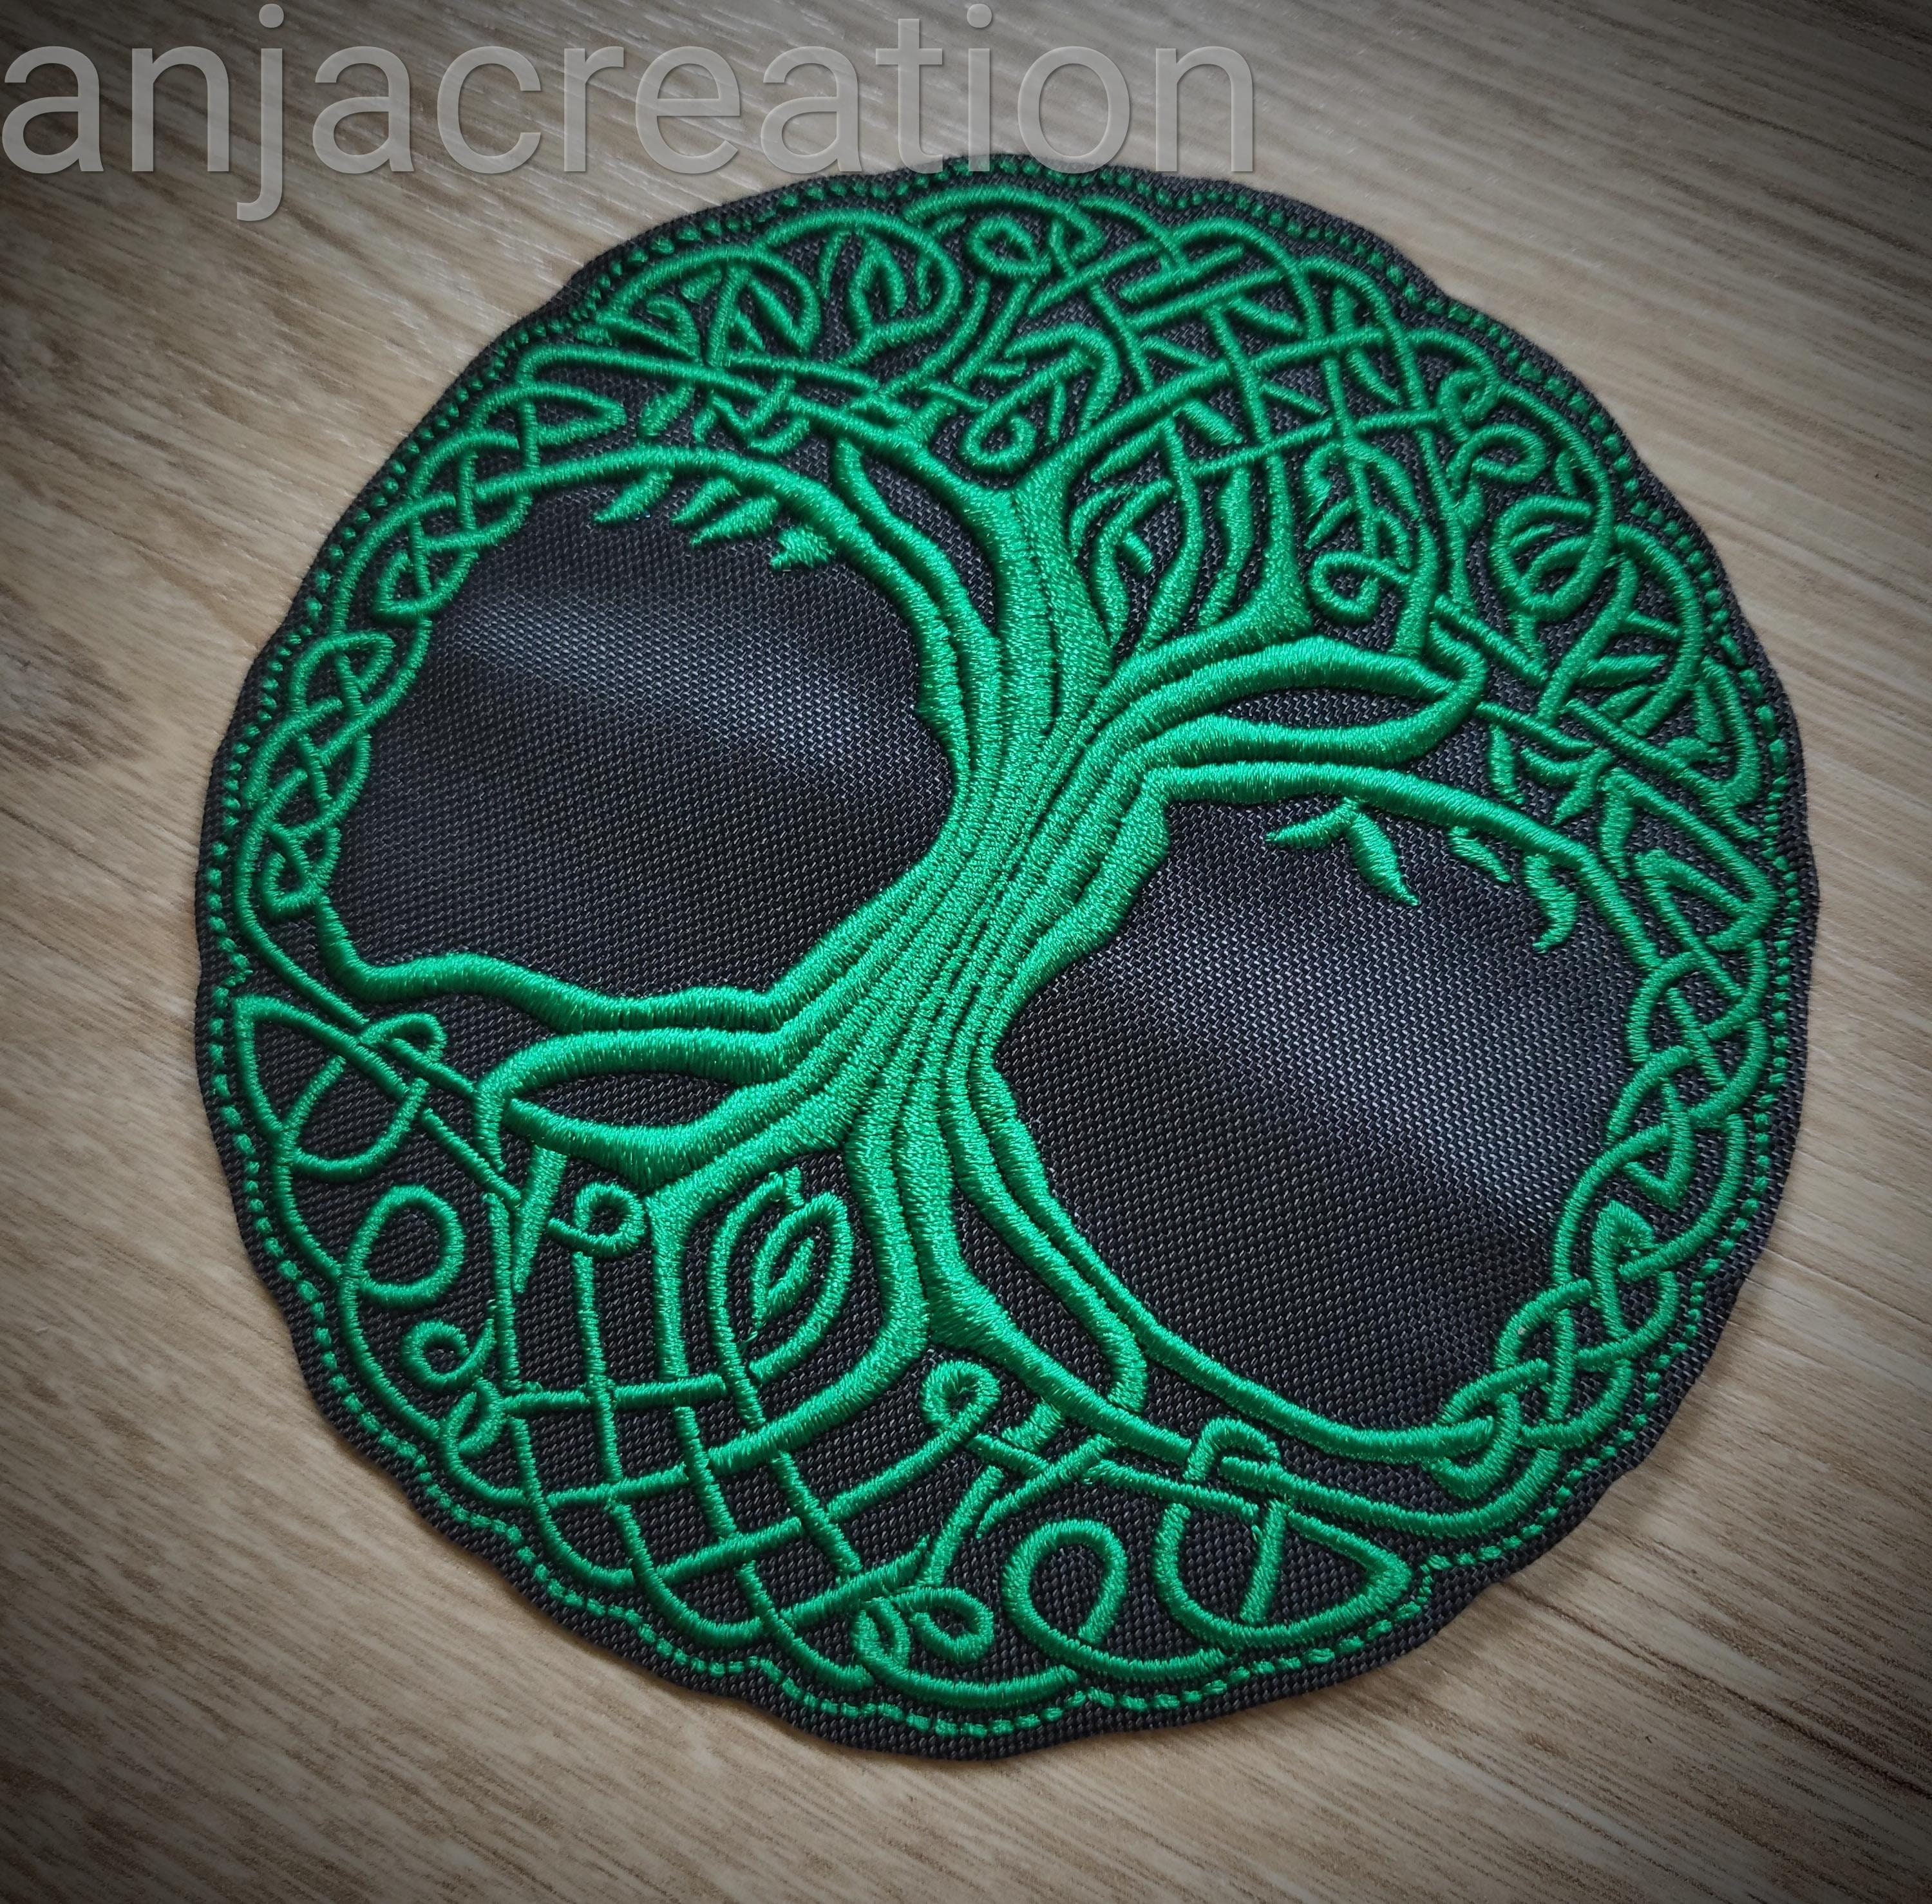 Customizable Ecusson Patch Tree of Life 10cm Esoteric Celtic Zen Iron-on  for Decoration or Repair of Clothing 